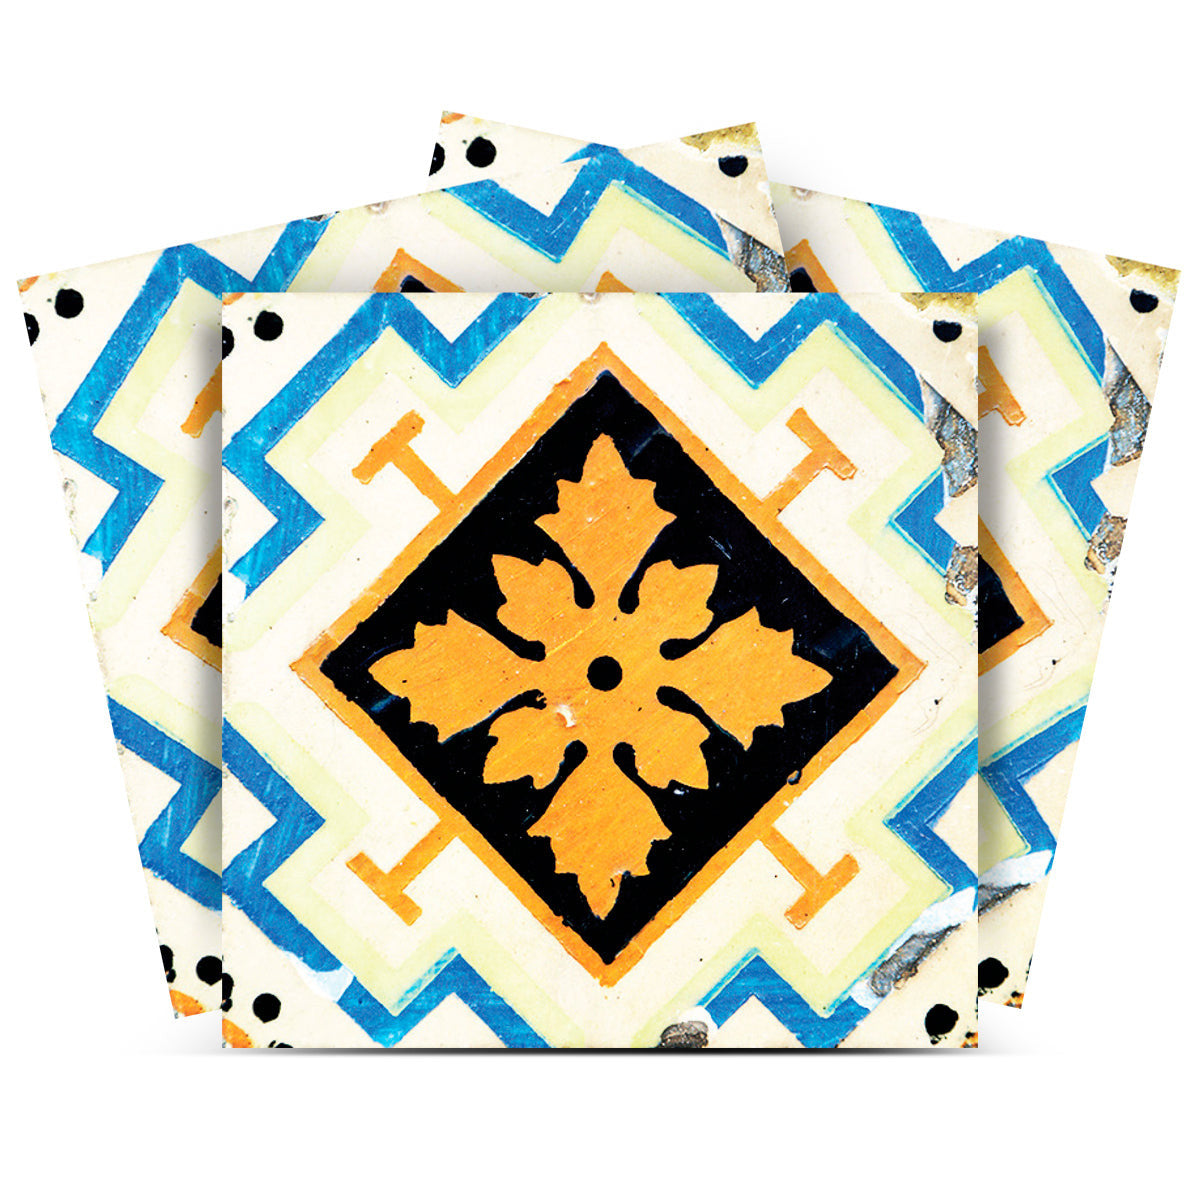 7" x 7" Gold Snowflake Peel and Stick Removable Tiles